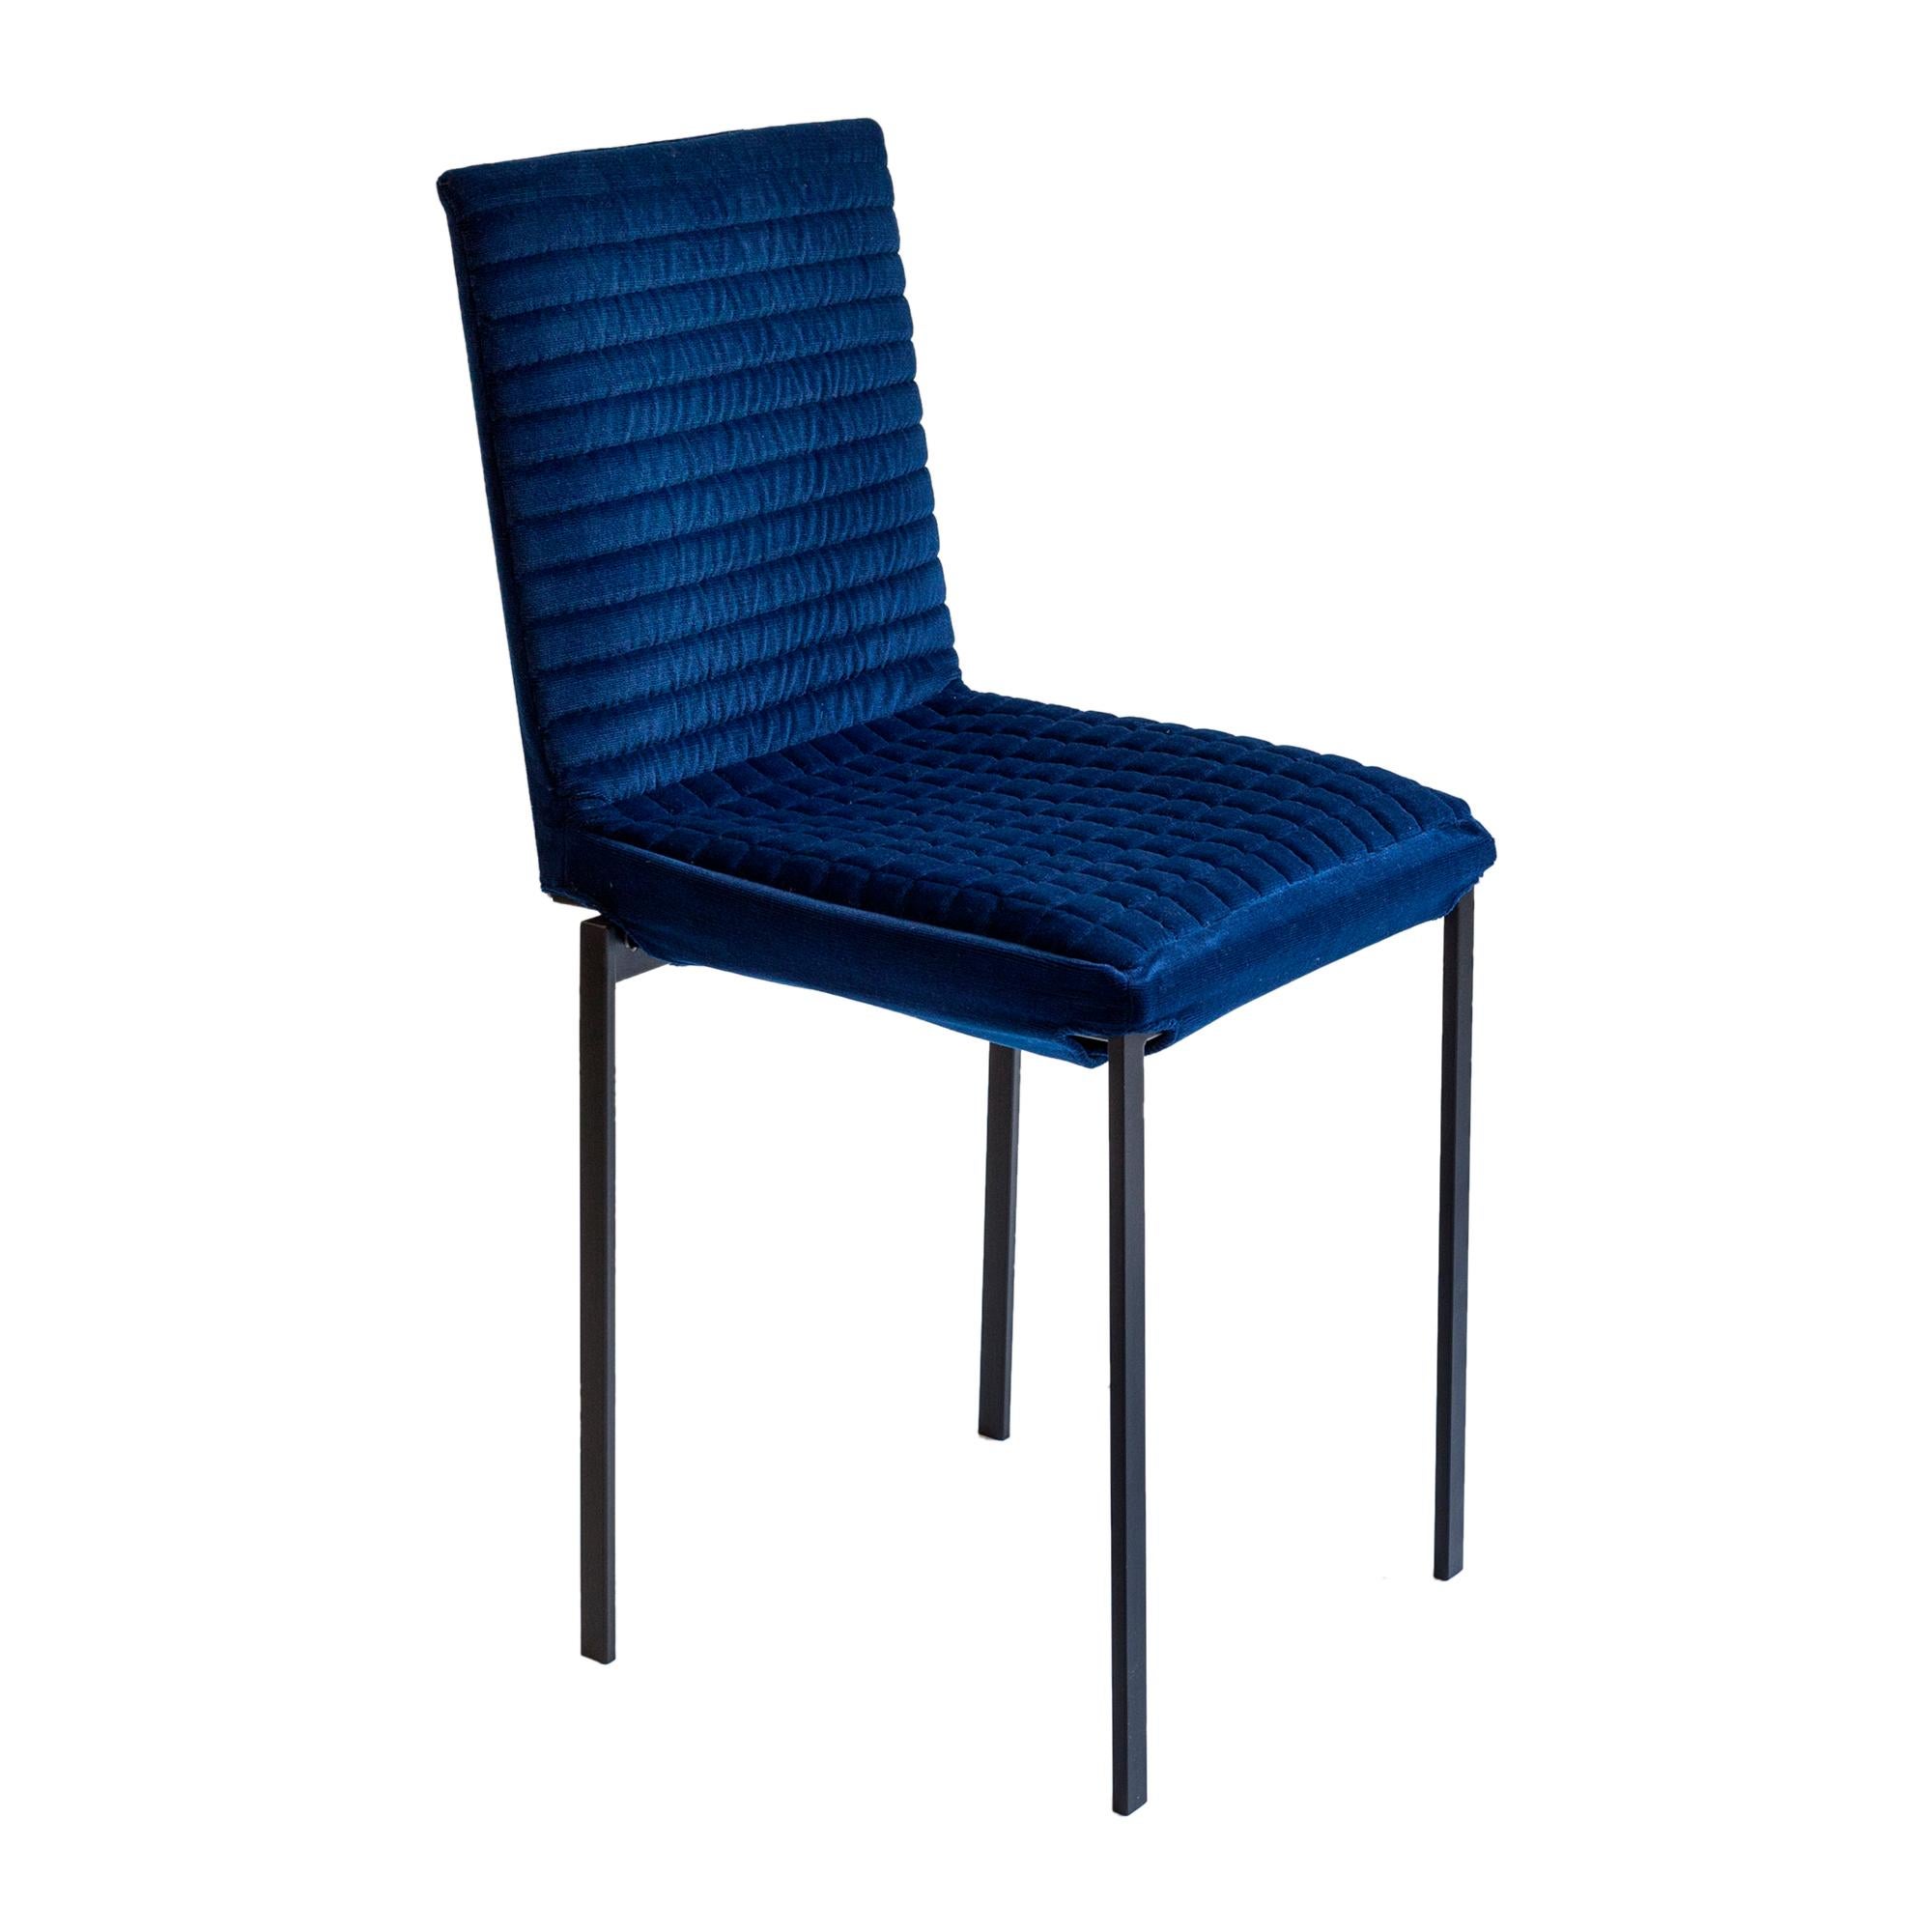 The ‘Tanit Soft’ chairs are available with an option that makes them unique objects in terms of richness and comfort: an upholstered and quilted cover of various colors that is put on the frame and fastened with a Velcro strap.
The upholstered quilt